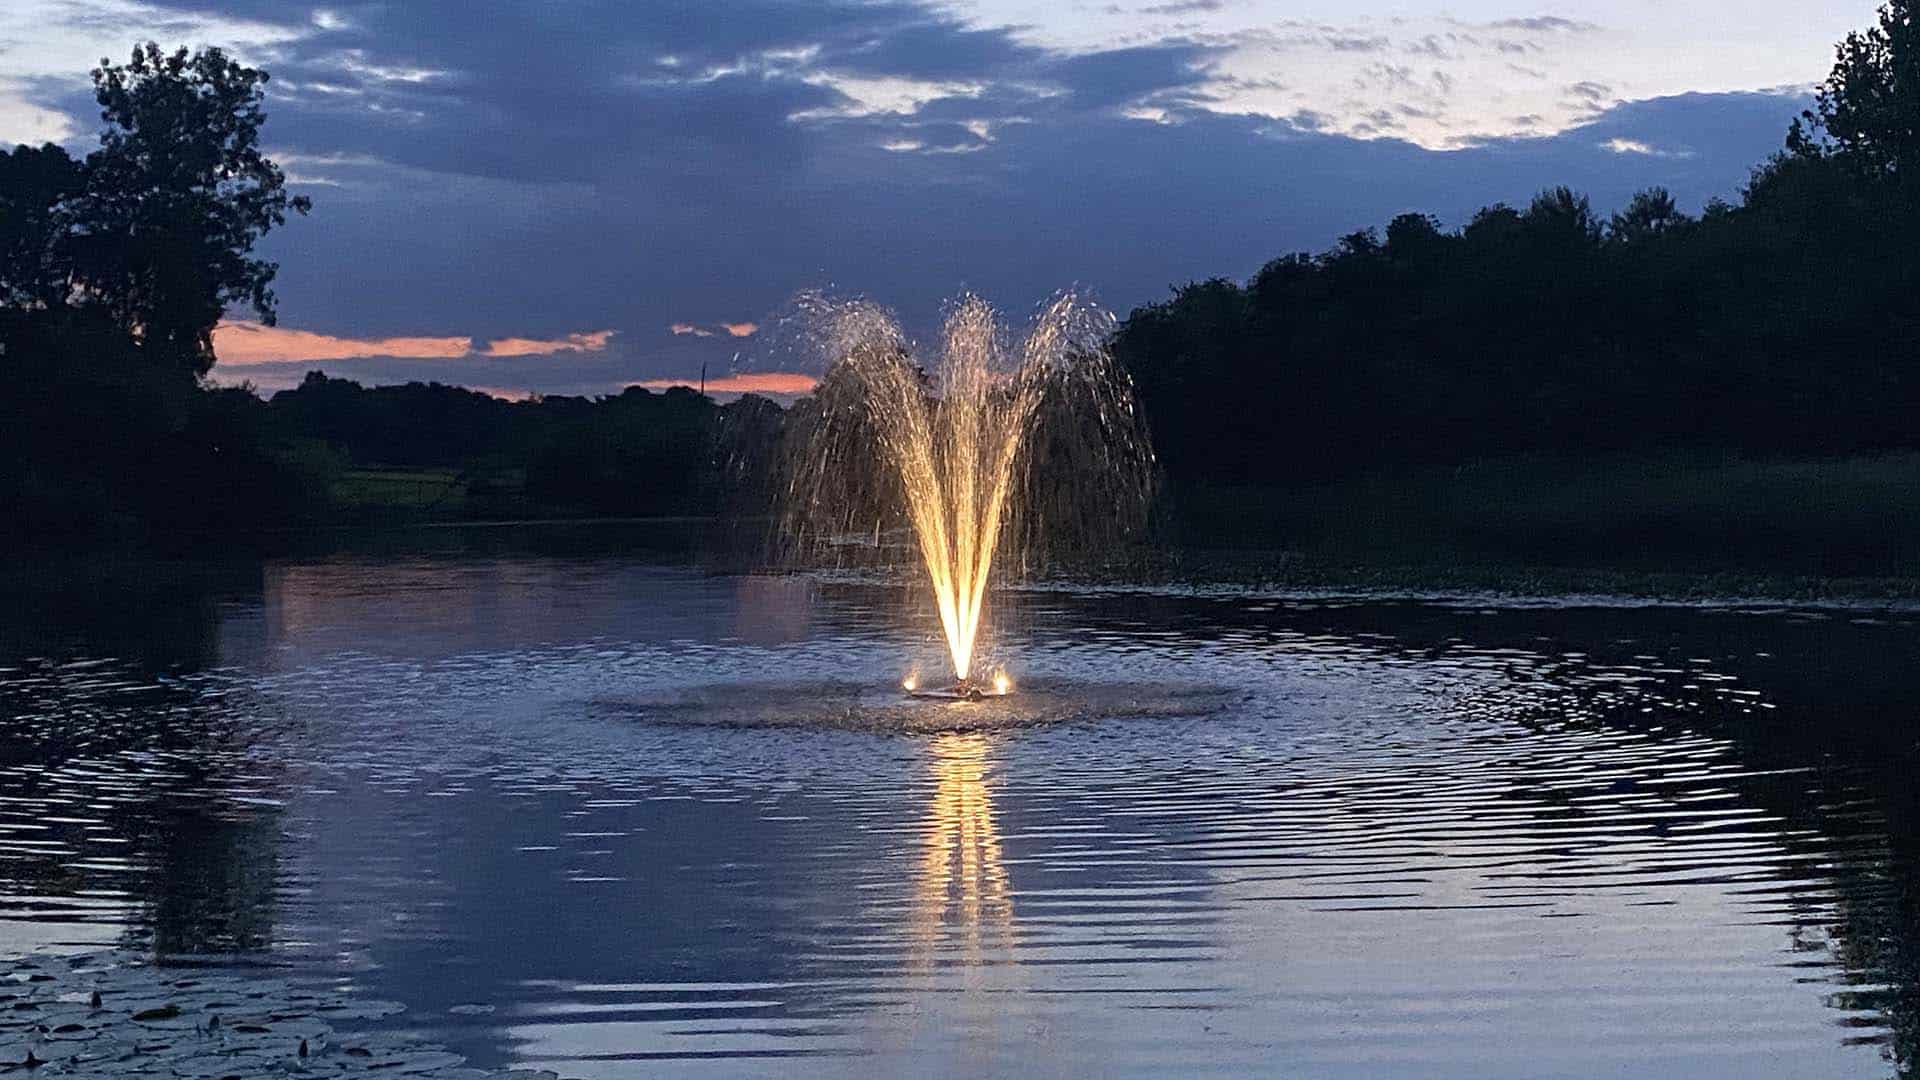 Aerating fountains add beuty to your lake or pond